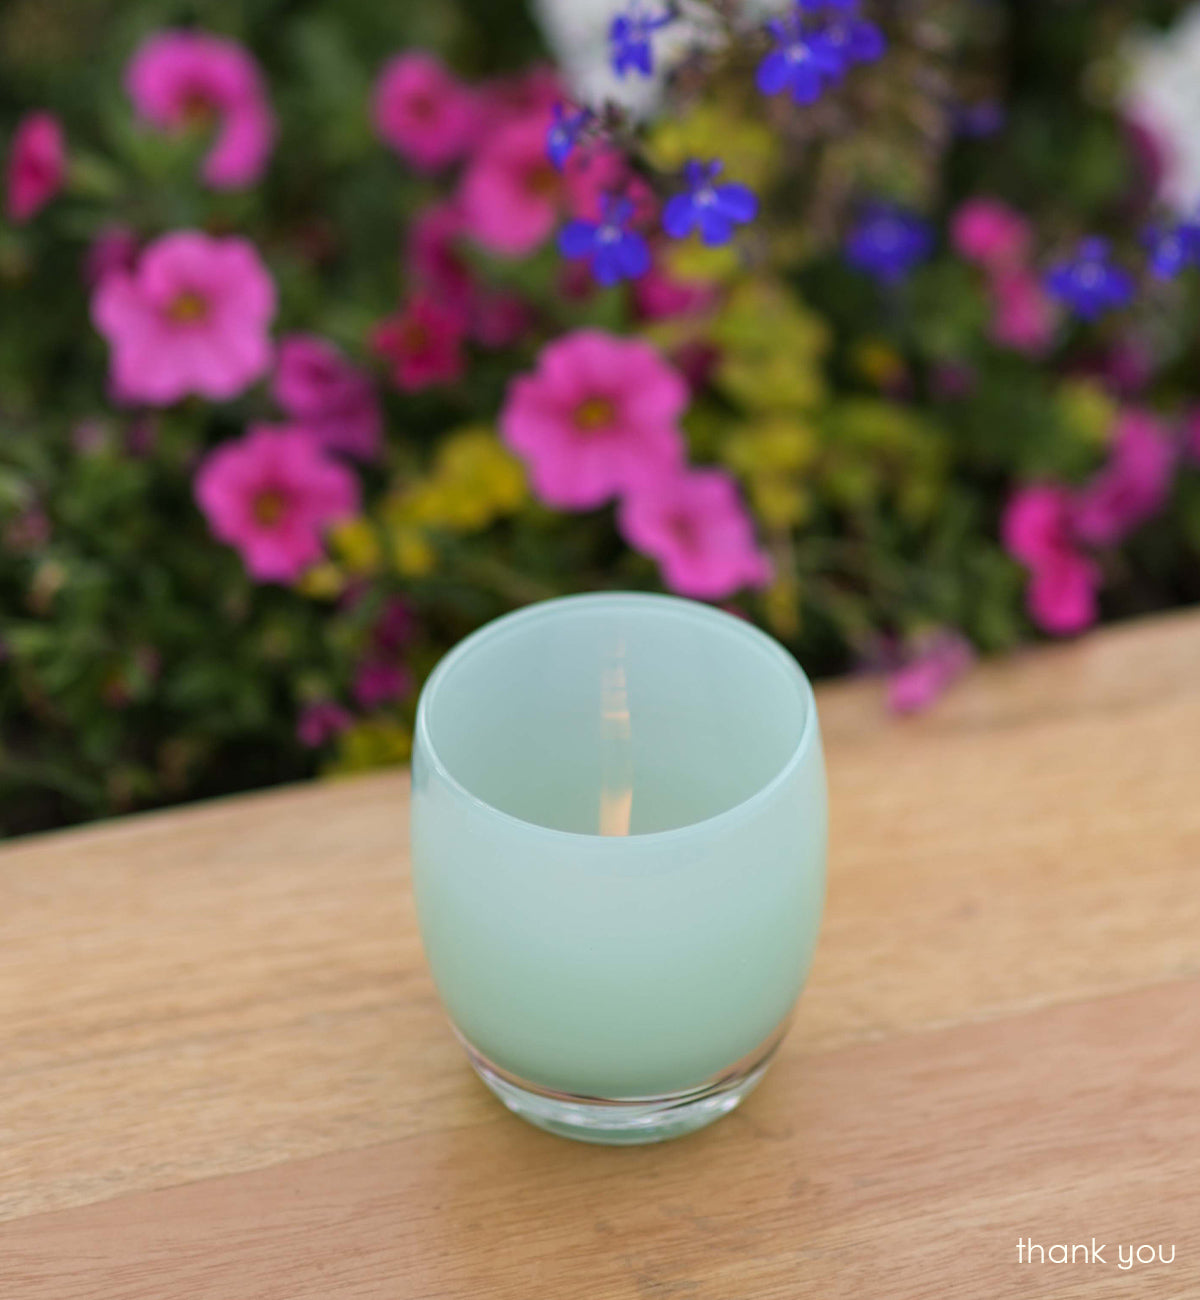 thank you mint green hand-blown glass votive candle holder on light wood table with pink and blue flower plants in background.